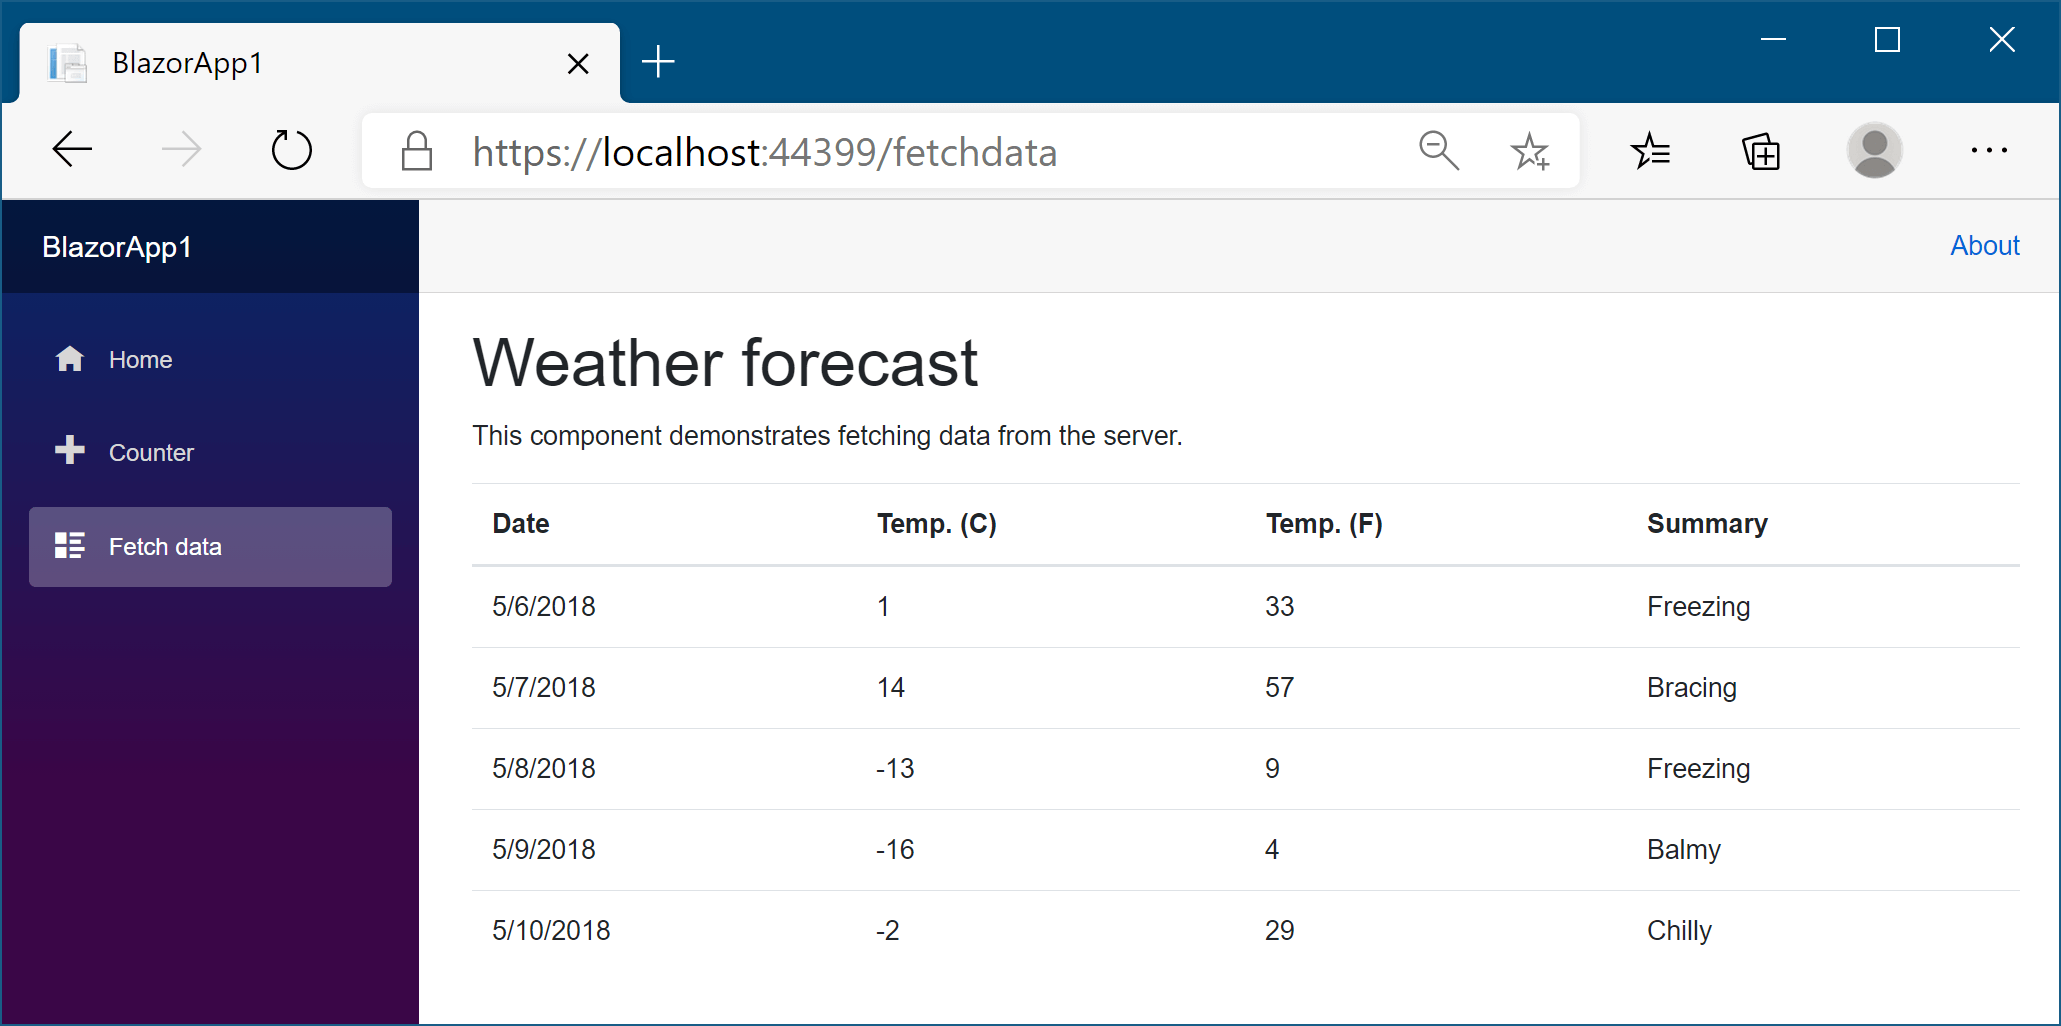 The Weather forecast page works fine client-side